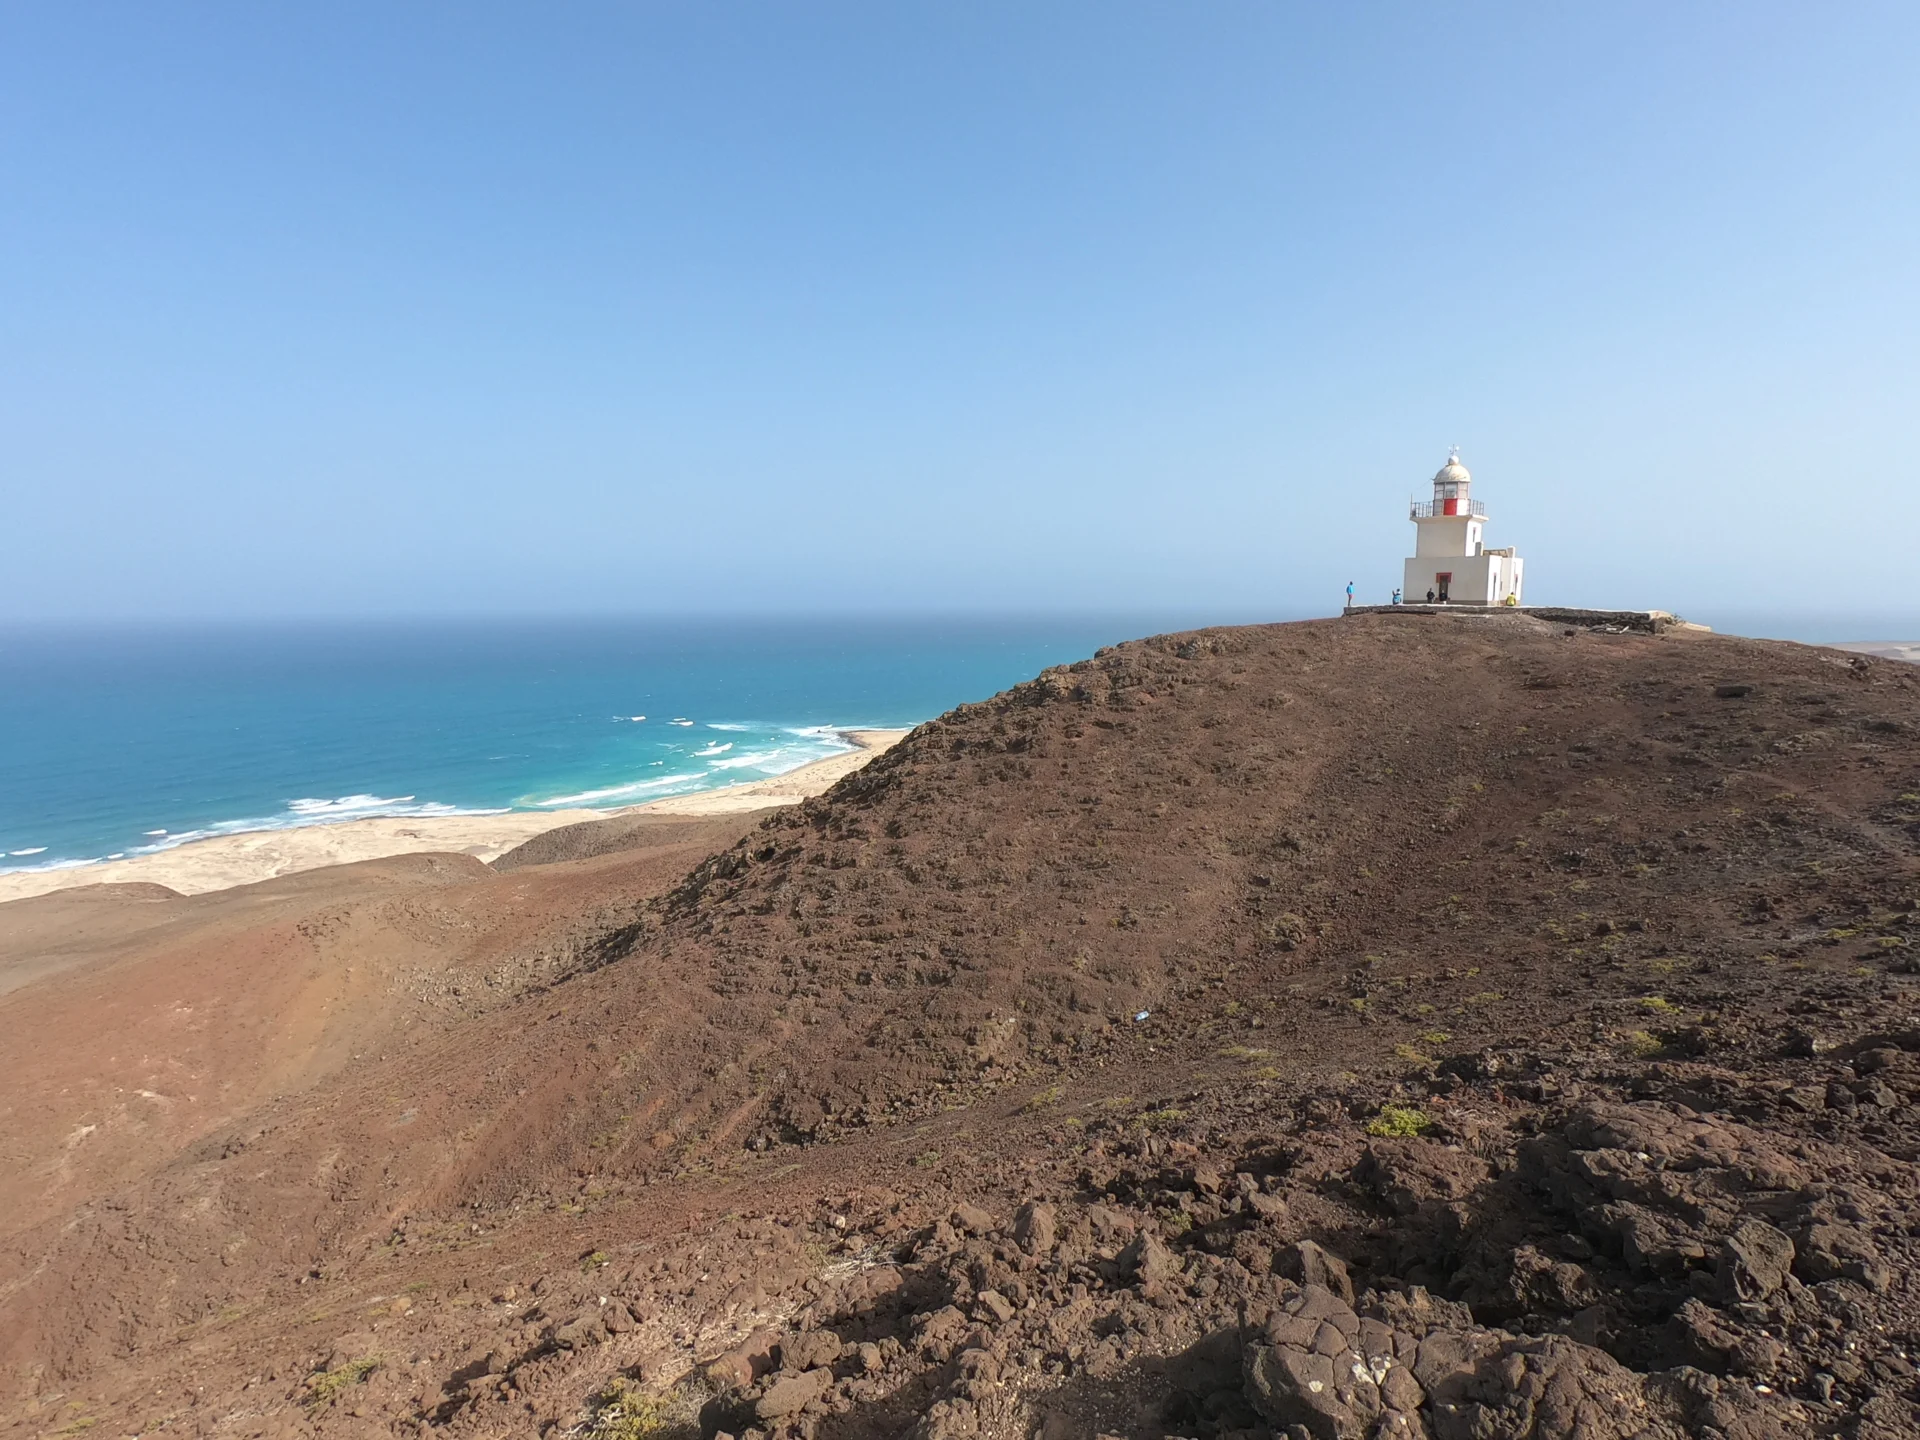  Boa Vista is an island in Cape Verde, off the coast of West Africa. It's known for the sand dunes and moonlike volcanic landscapes of the Viana Desert. White-sand beaches include Tortuga and the sprawling Santa Monica. Credit:  Arnau Ferrer.